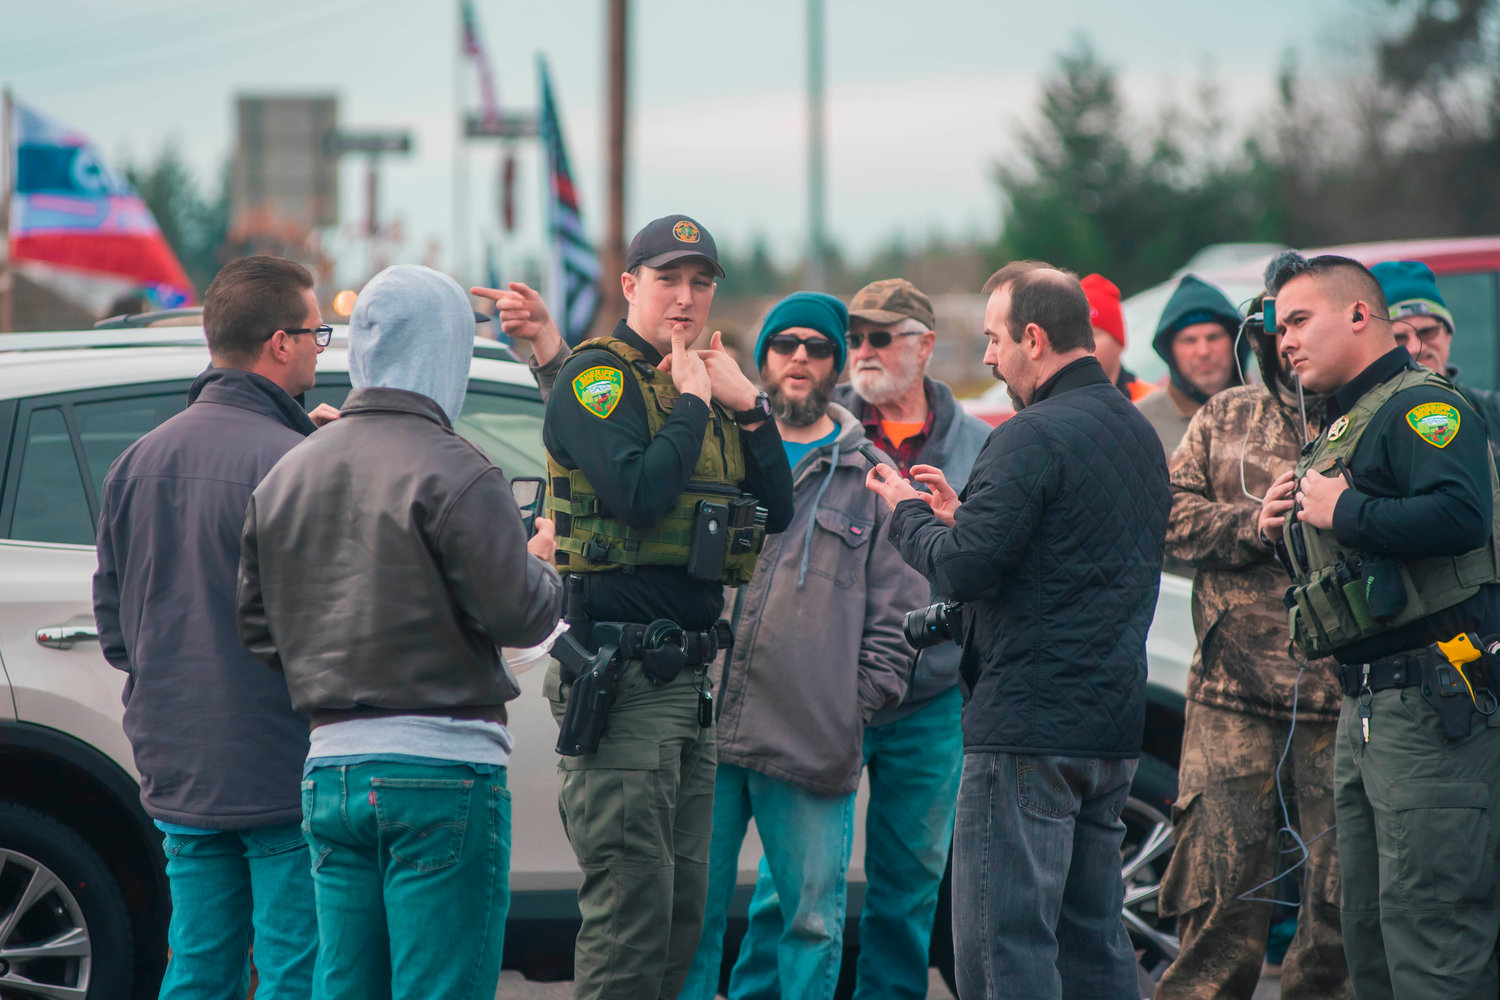 Lewis County Sheriff Deputies respond to a call at Spiffy’s after a car peeled out of the parking lot while surrounded by a group of ‘peaceful protesters’ on Thursday in South Chehalis.